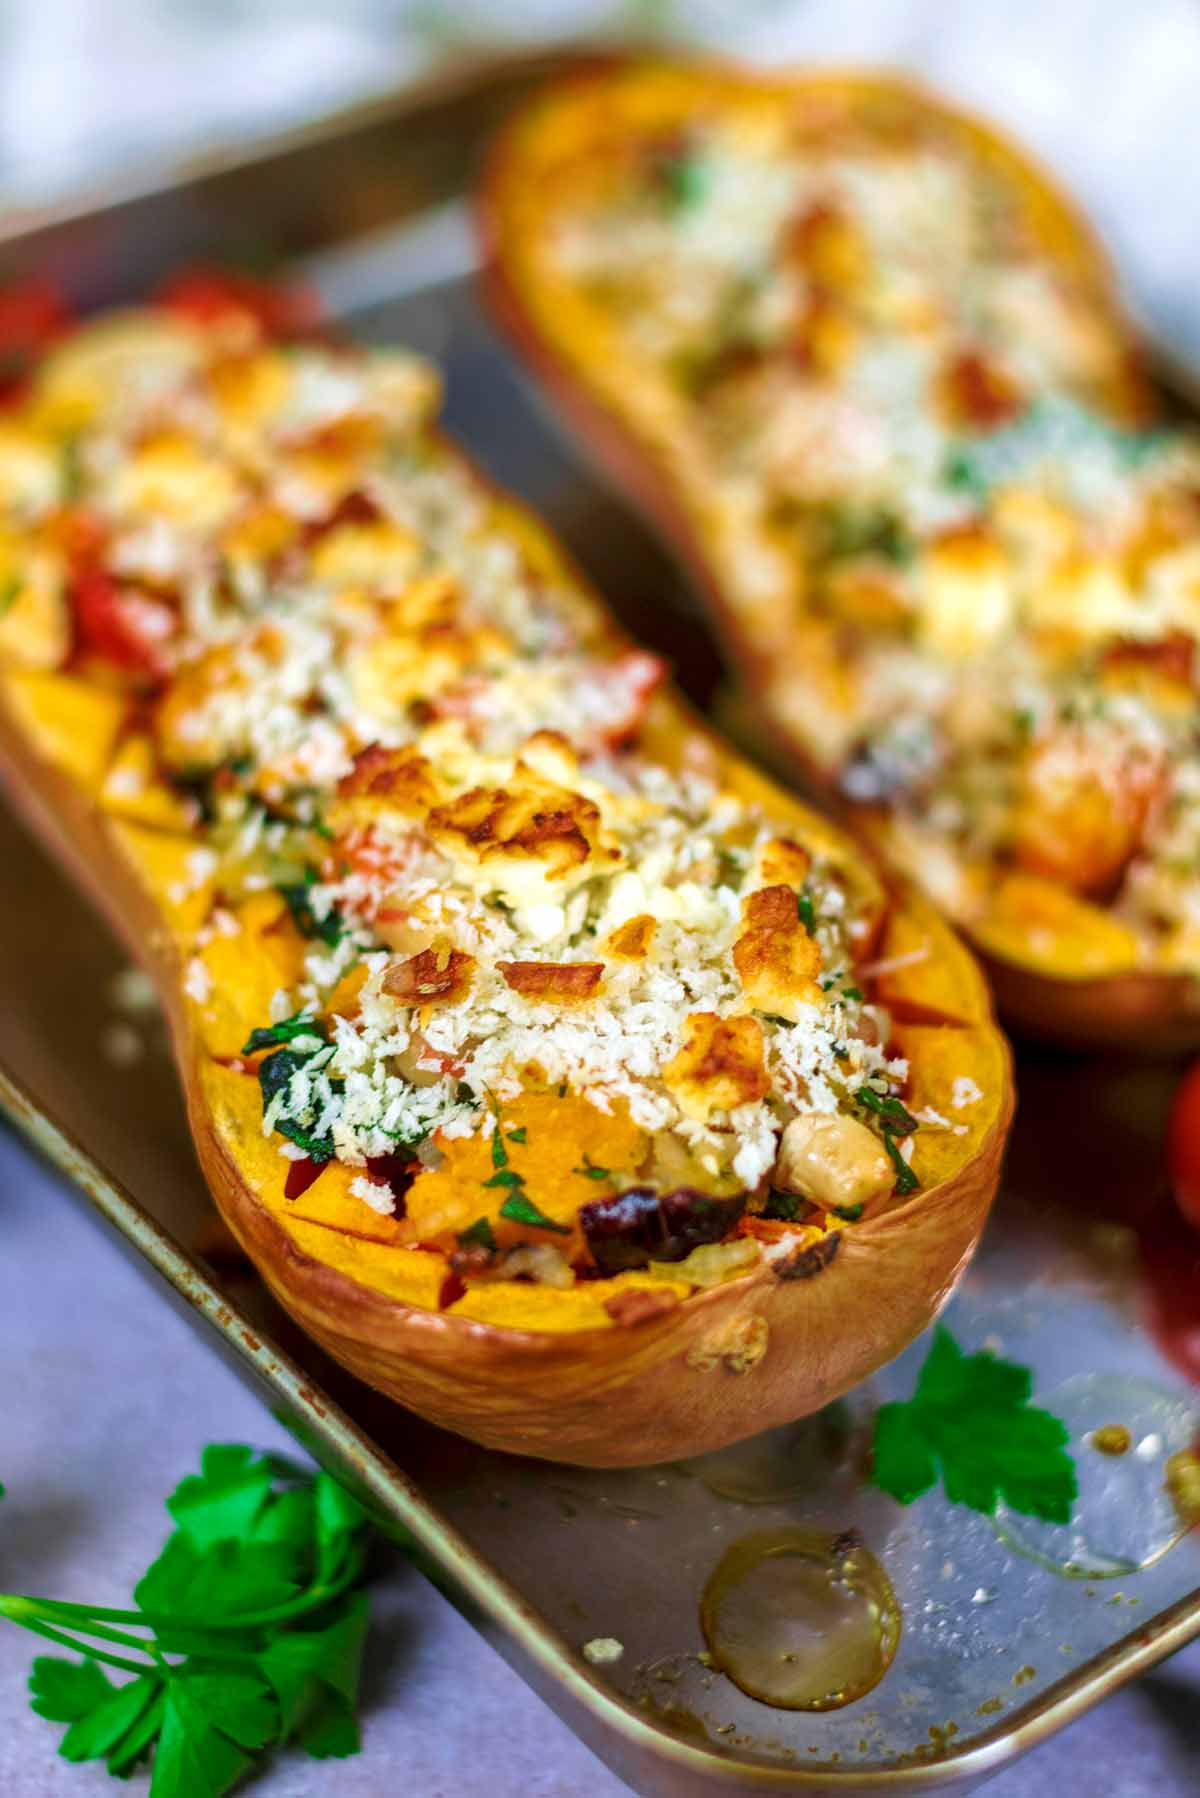 A stuffed butternut squash topped with breadcrumbs and charred feta cheese.